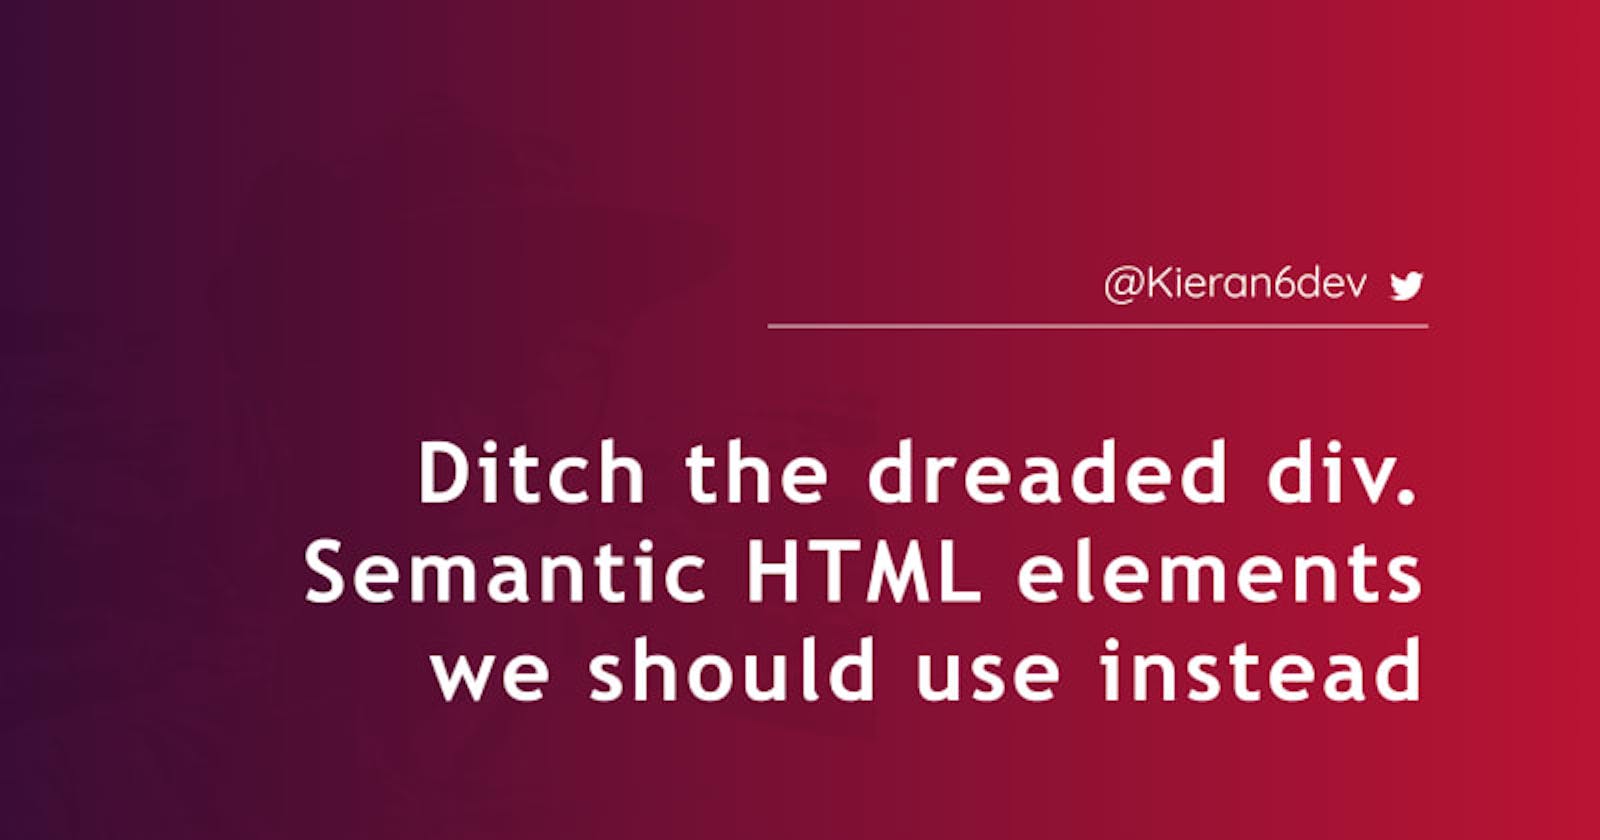 Ditch the dreaded <div />. Semantic HTML elements we should use instead